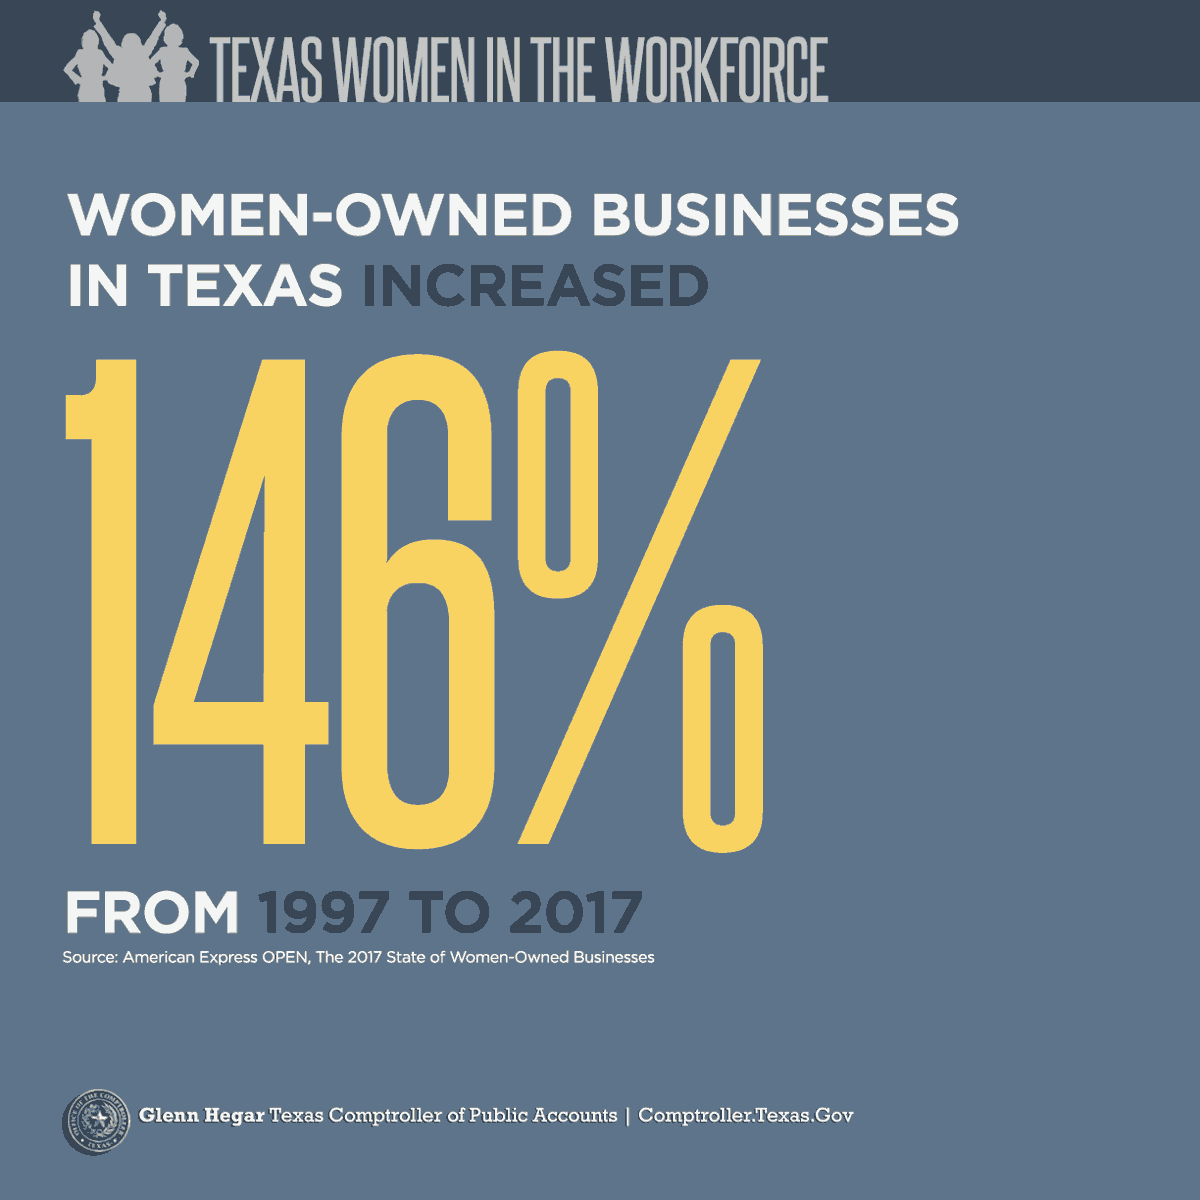 Texas Women in the Workforce - 
Women-owned businesses in Texas increased 146% from 1997 to 2017.
Source: American Express OPEN, The 2017 State of Women-Owned Businesses
